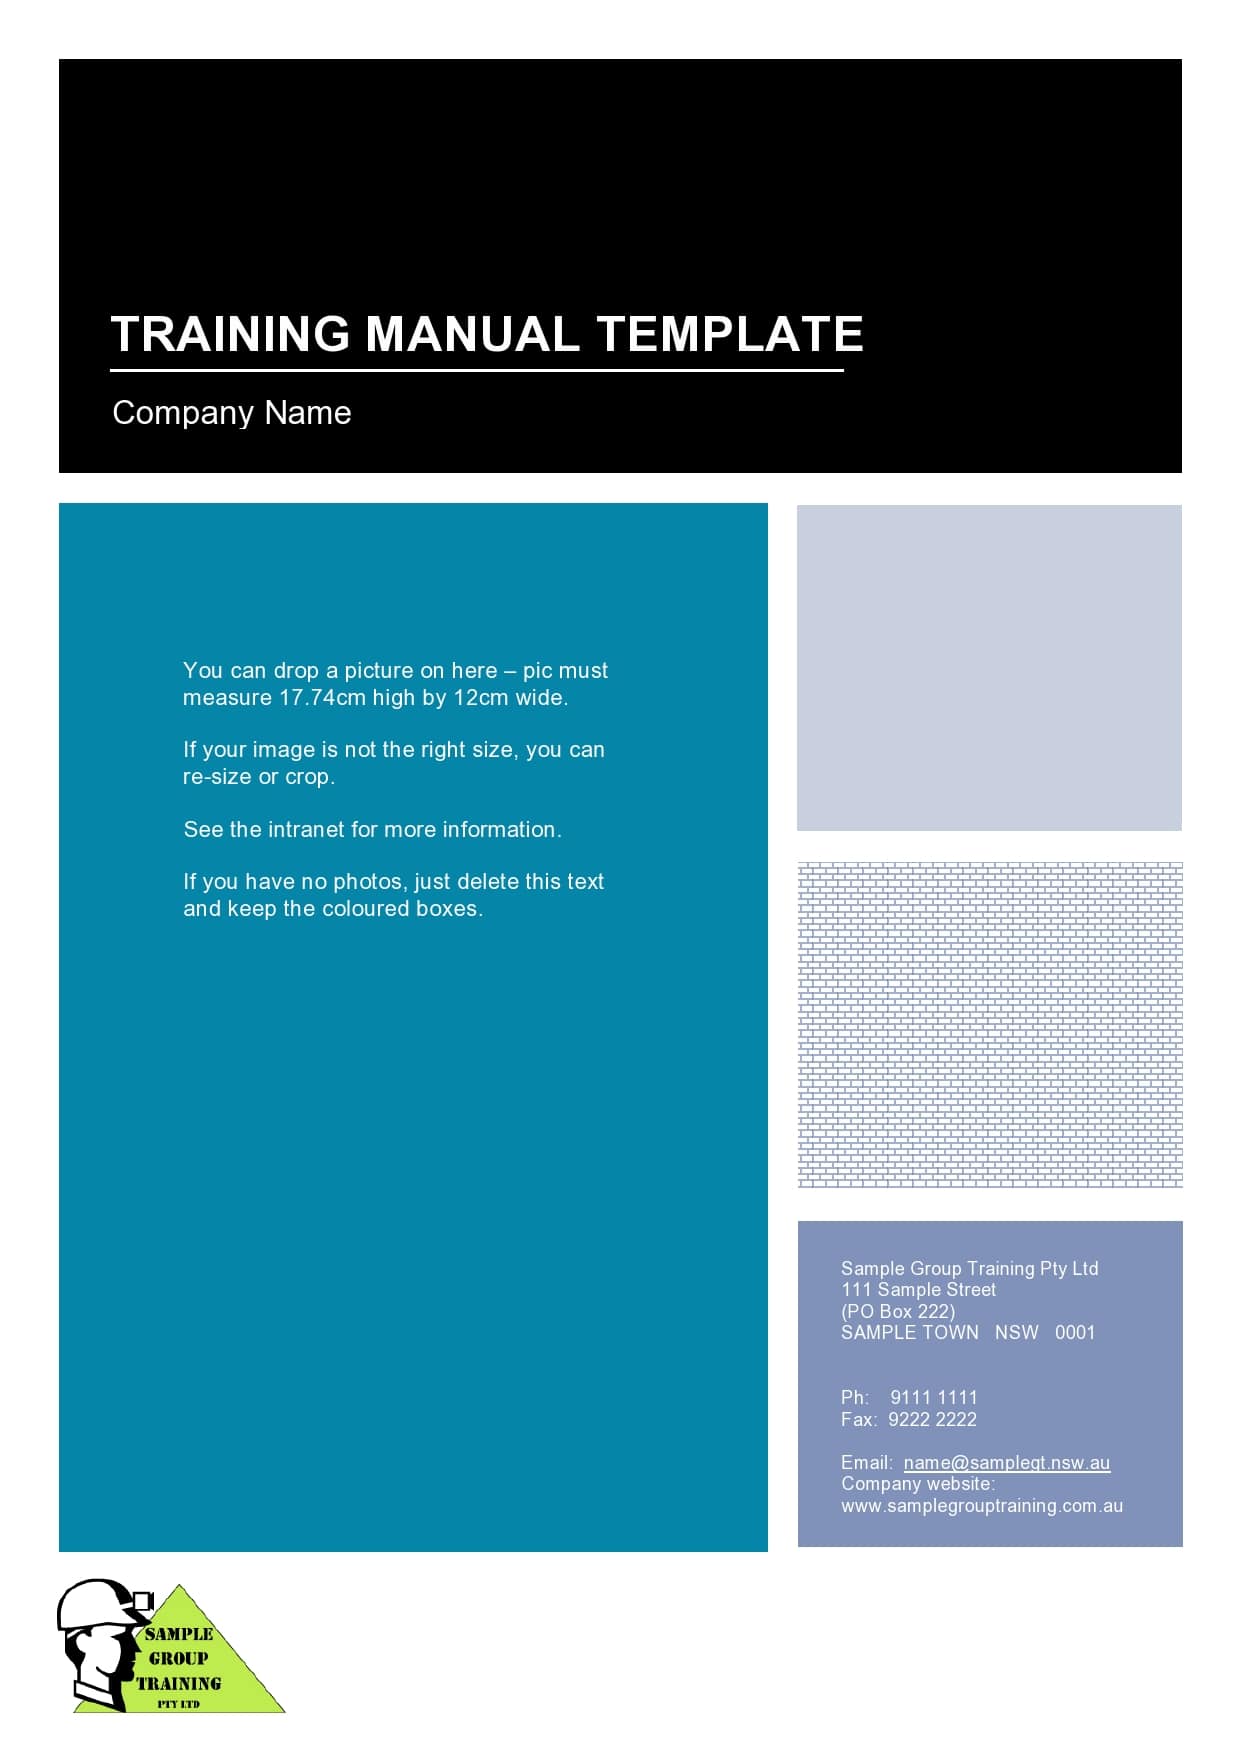 21 Best Training Manual Templates (+Examples) - TemplateArchive Pertaining To Training Documentation Template Word